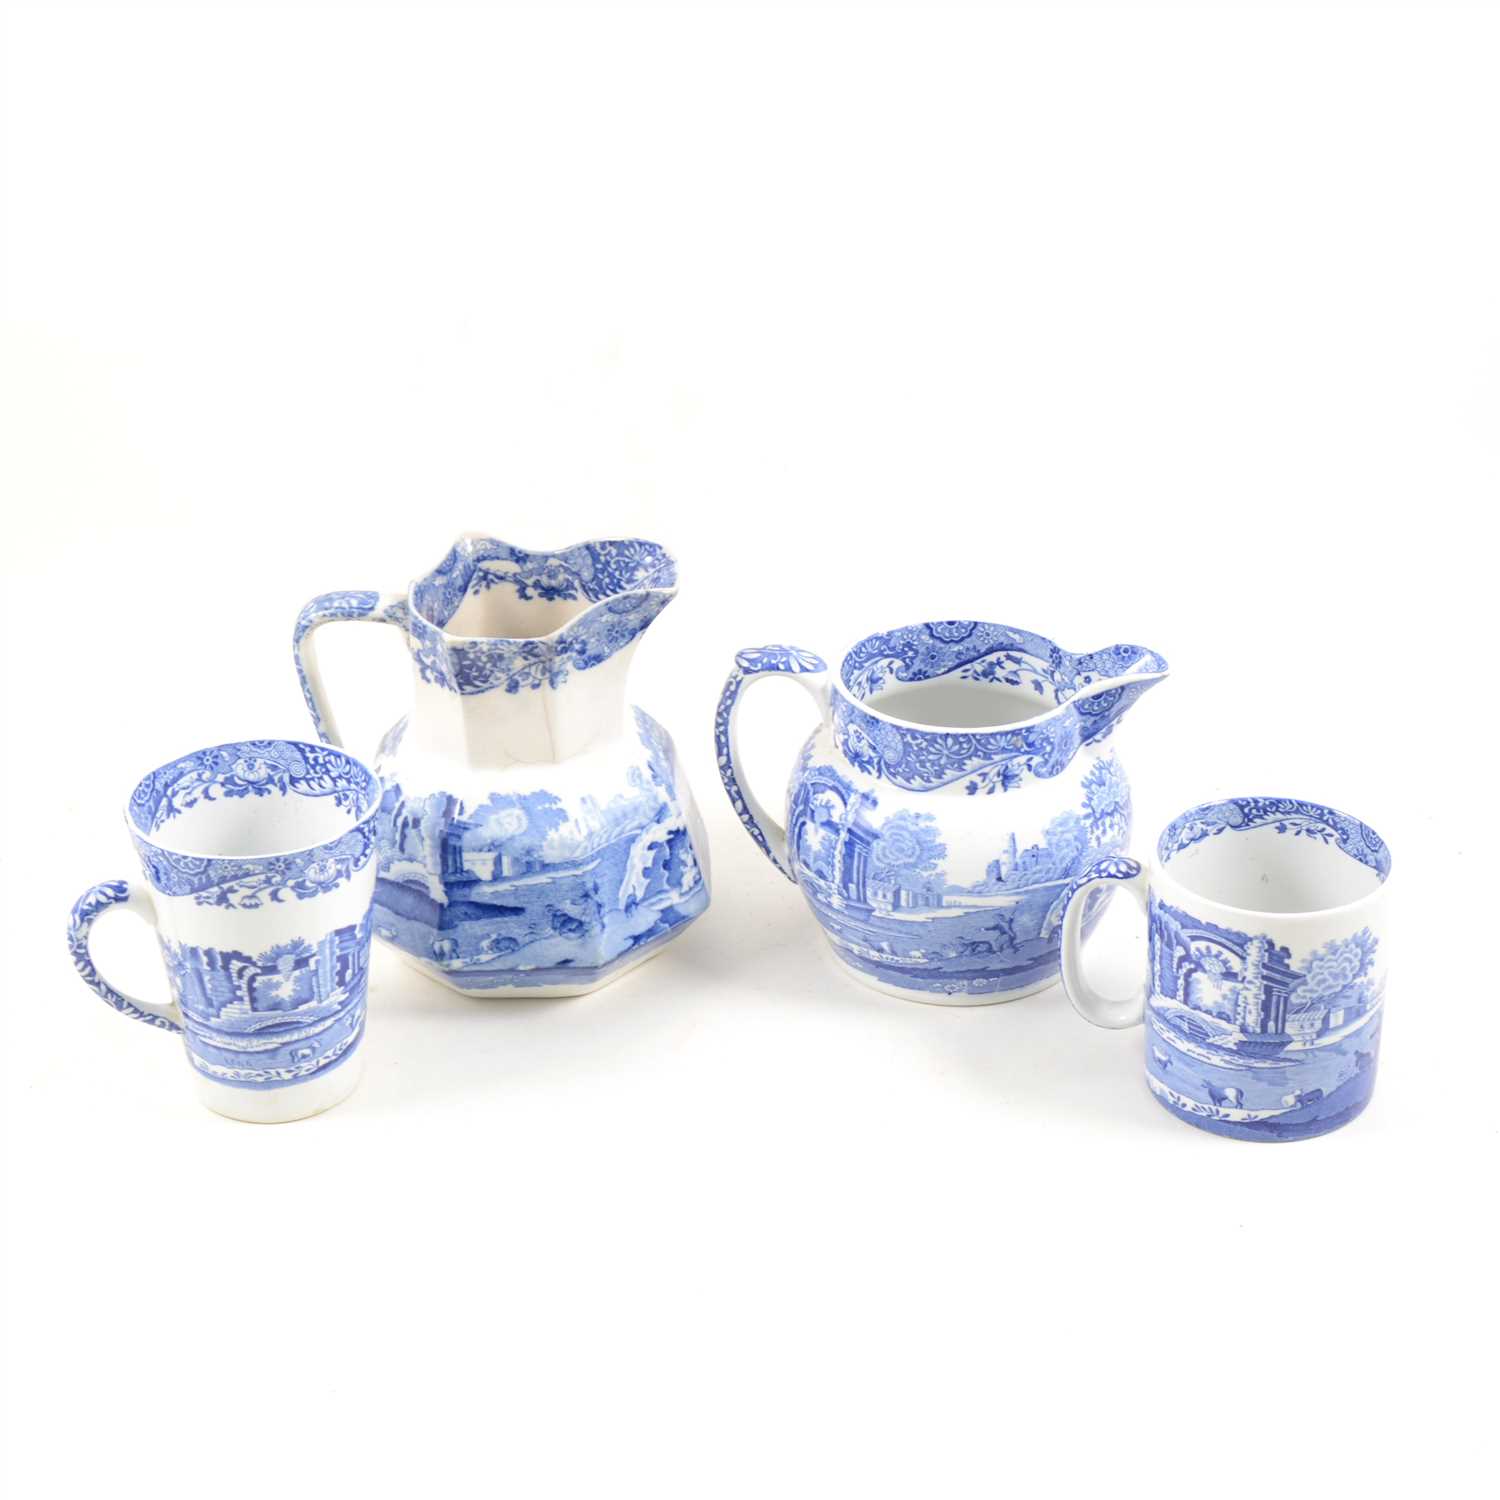 Lot 91 - A quantity of Spode blue and white transfer printed ware in the "Italian" design.